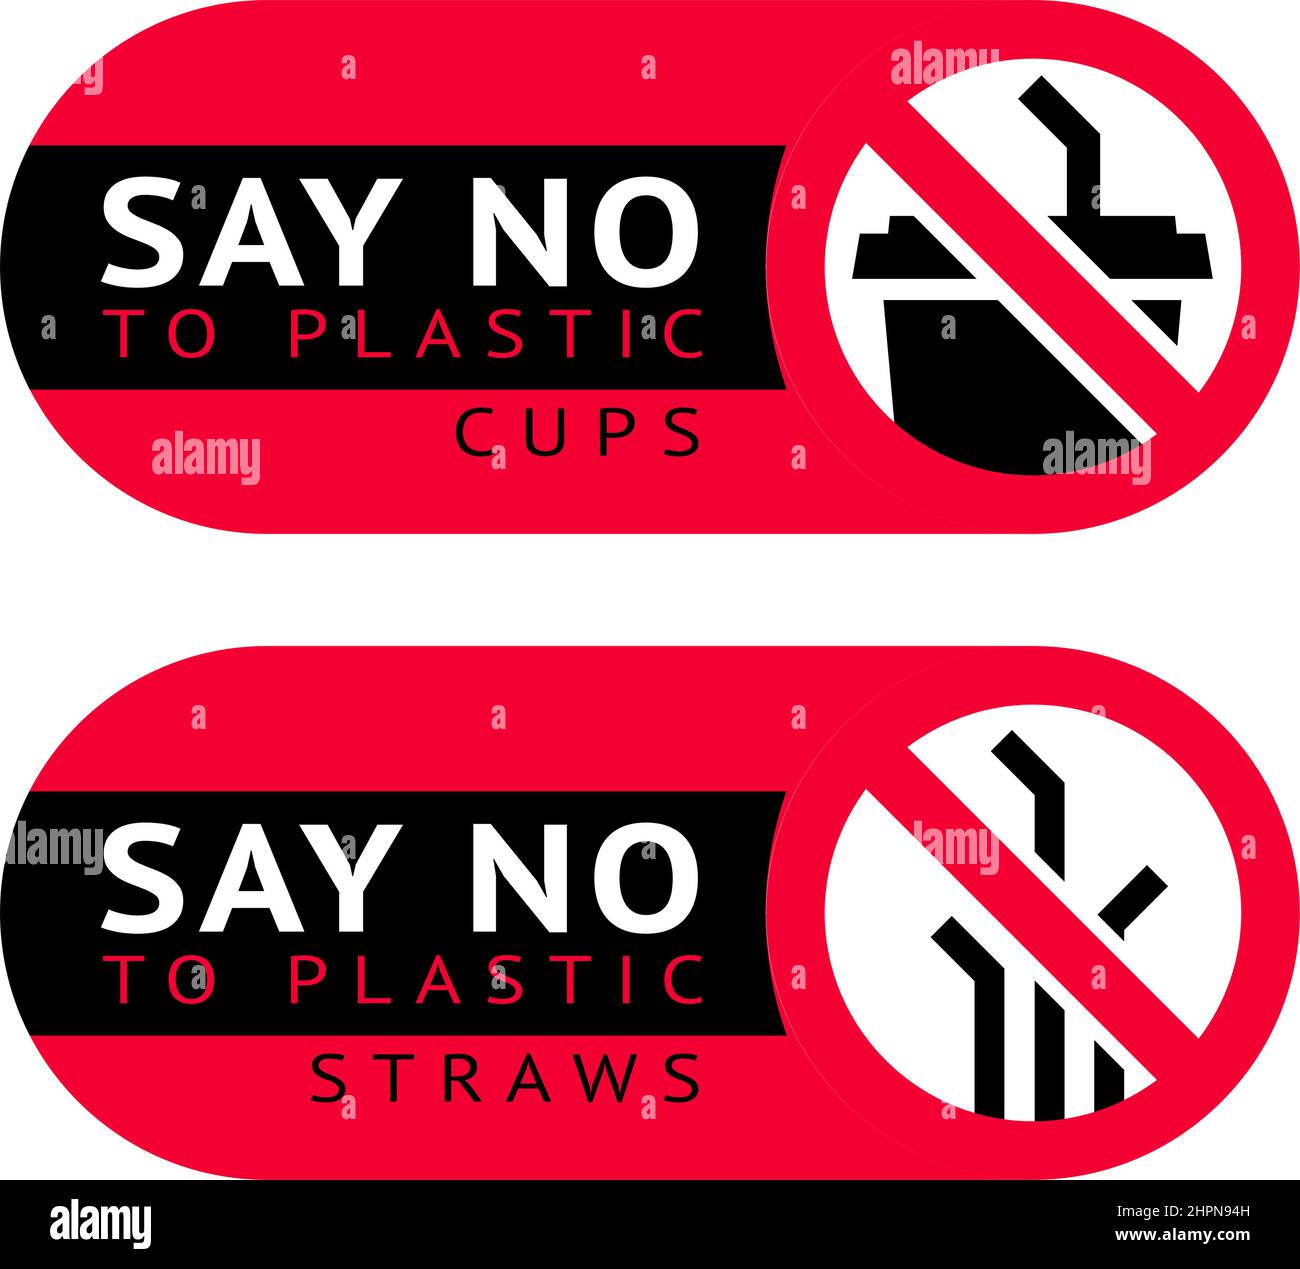 Say no to plastic cups and straws, two red trendy ecological labels for print, vector illustration Stock Vector